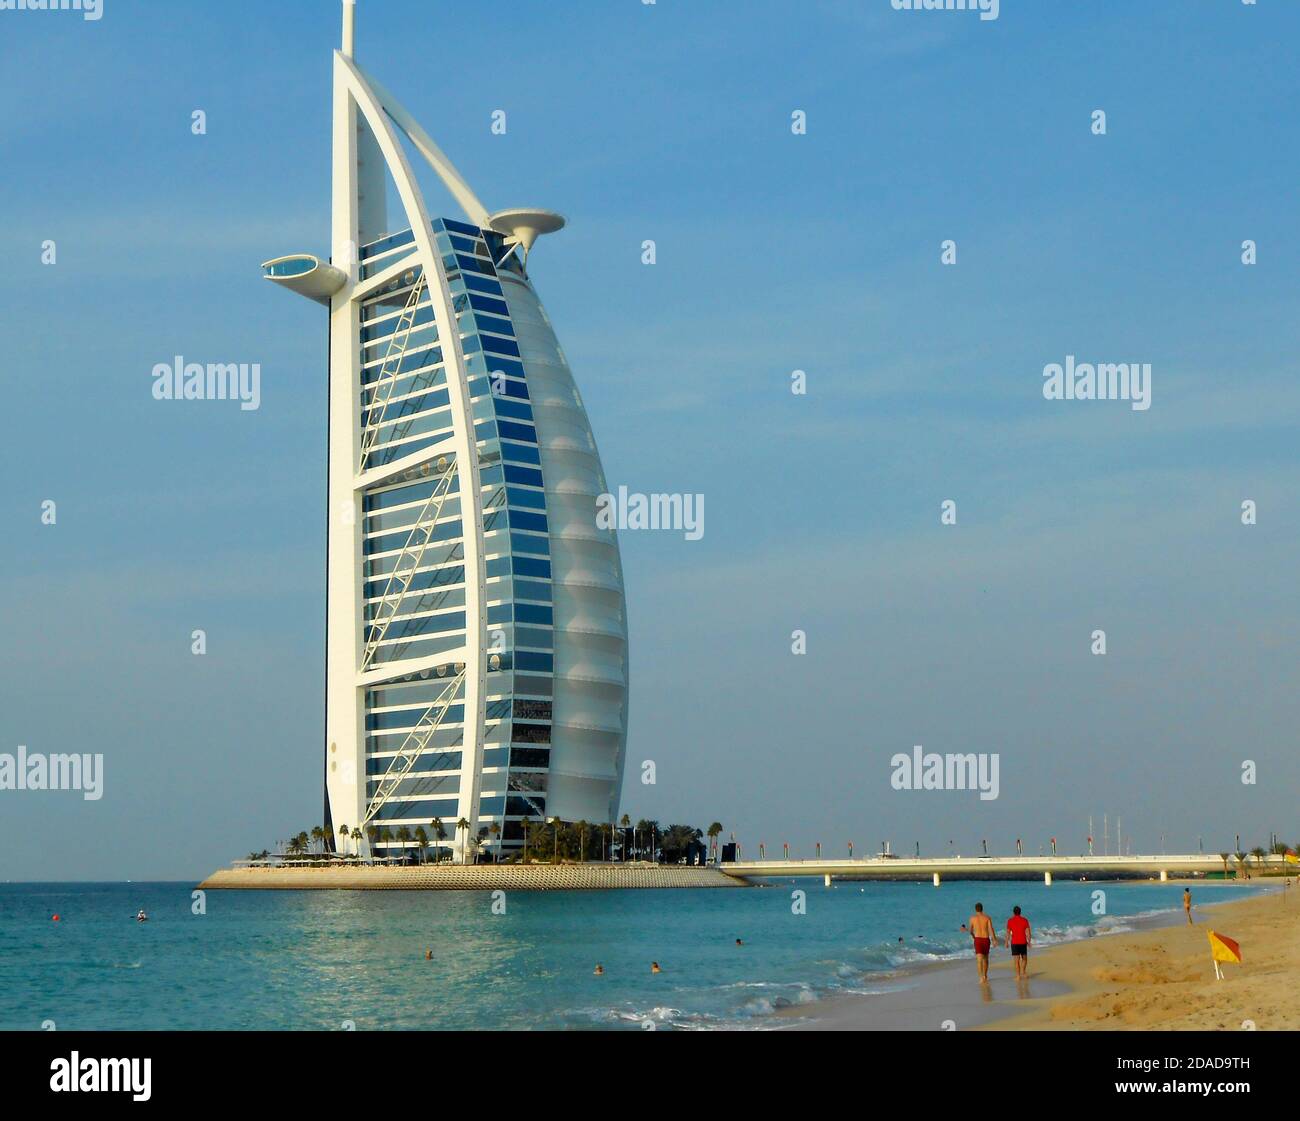 People in the sea and on the beach in front of the Burj Al Arab building in Dubai UAE Stock Photo